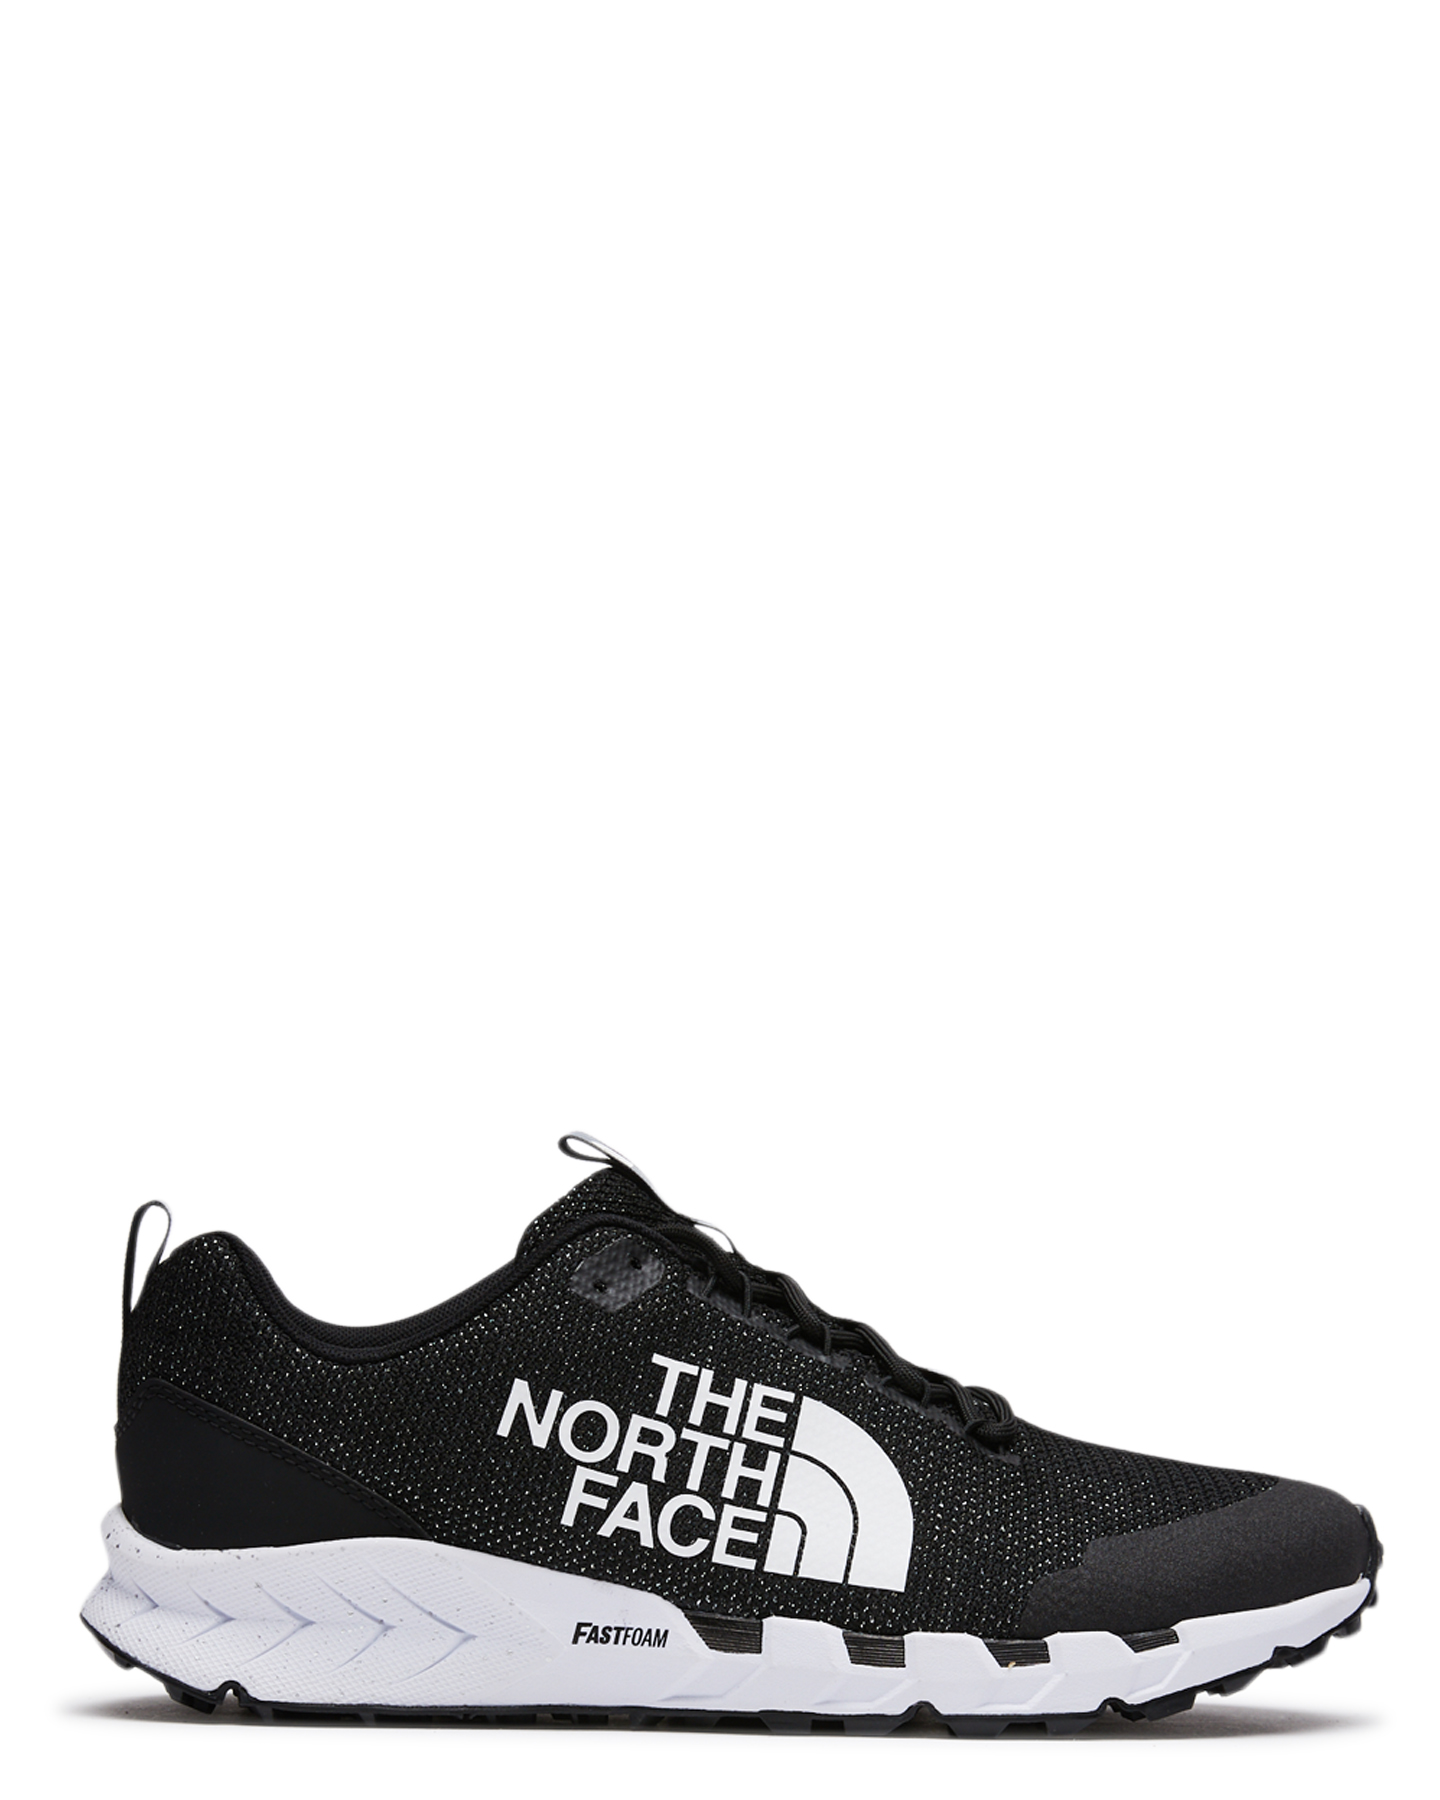 north face wide shoes